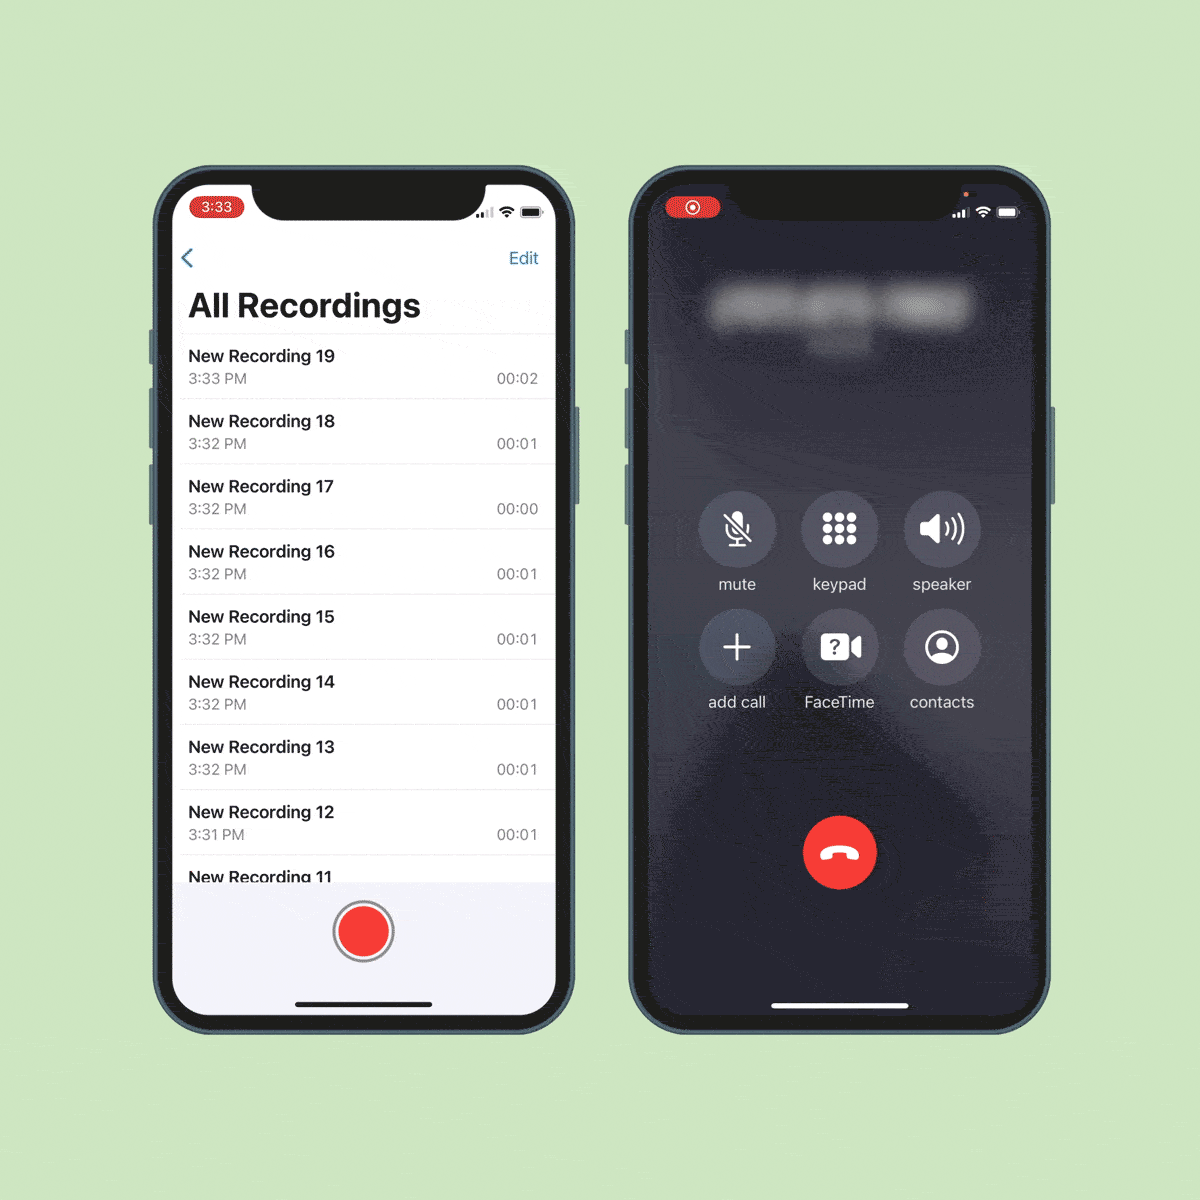 Animated GIF showing Voice Memo function: record call